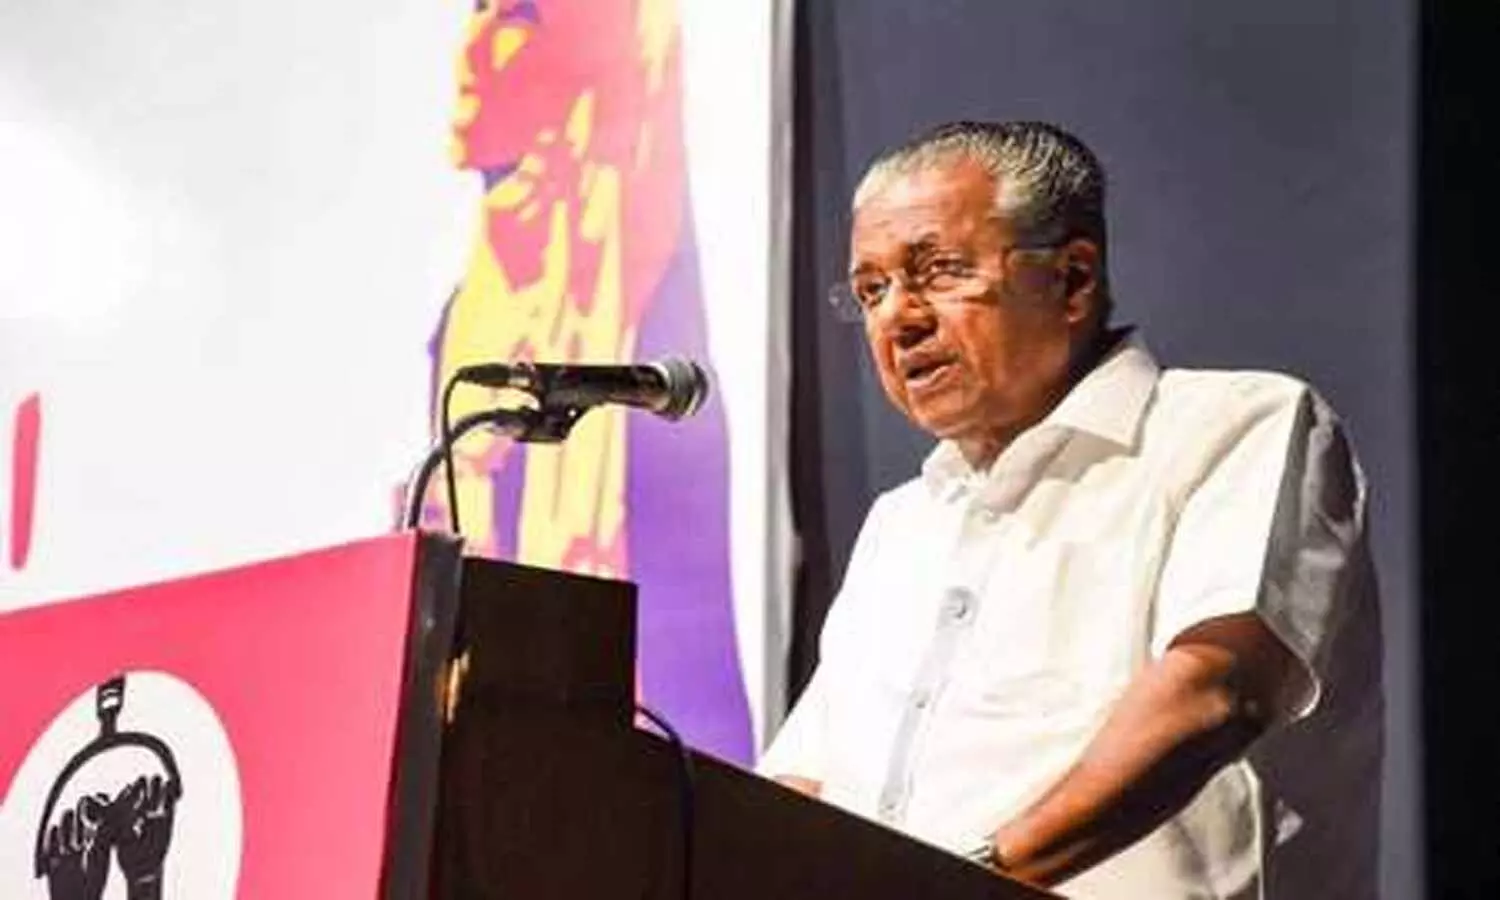 Kerala govt to conduct 1 lakh Covid-19 tests per day, mandates mask, social distancing